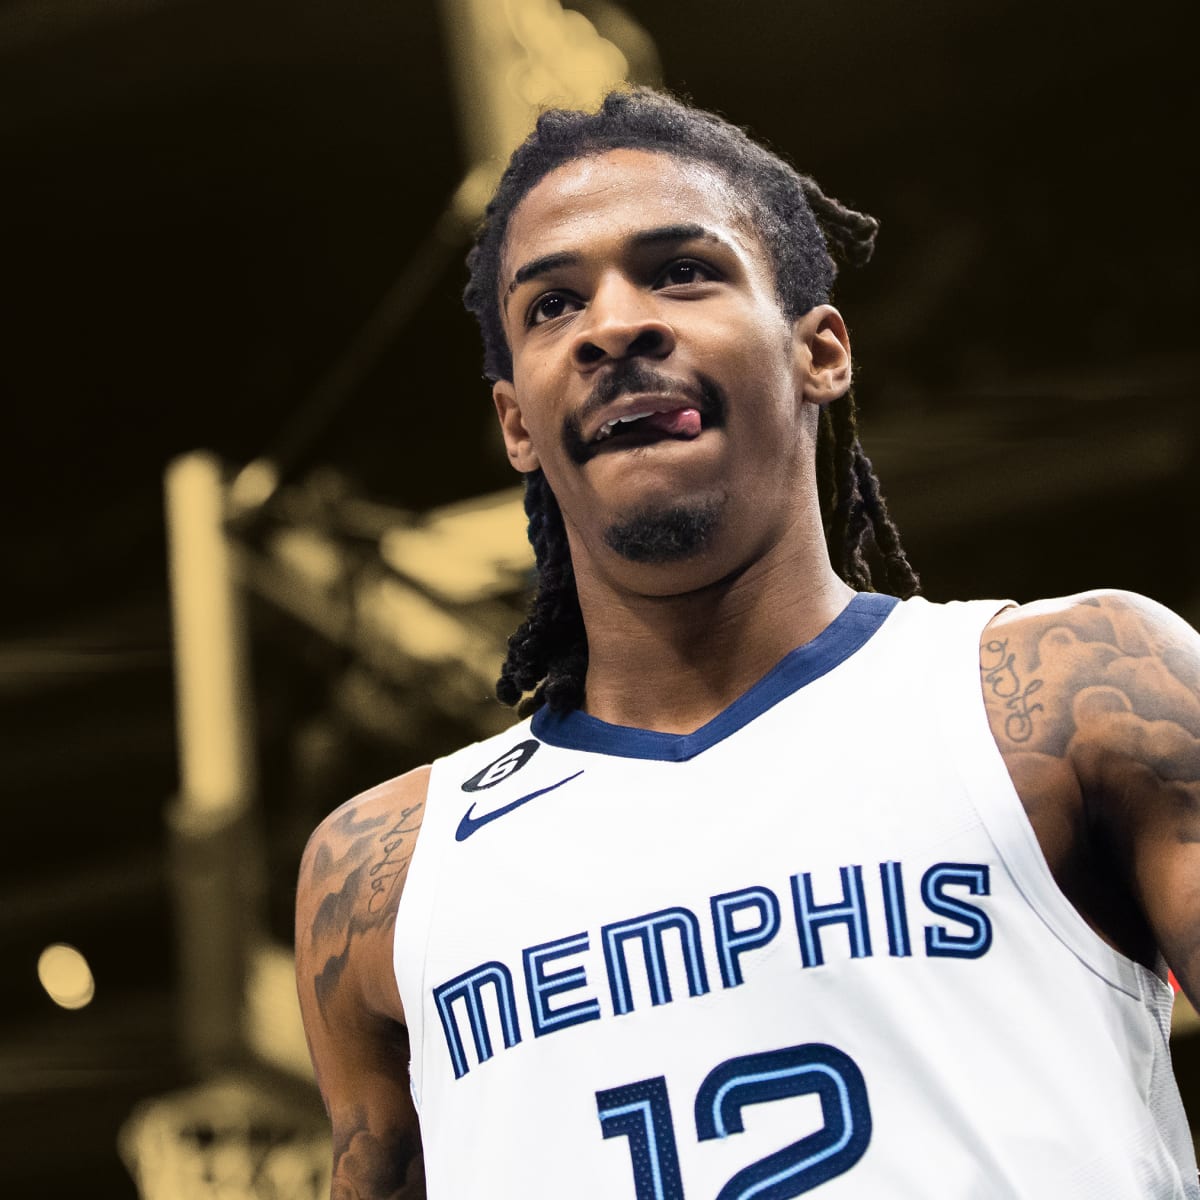 Grizzlies: Ja Morant news conference best quotes